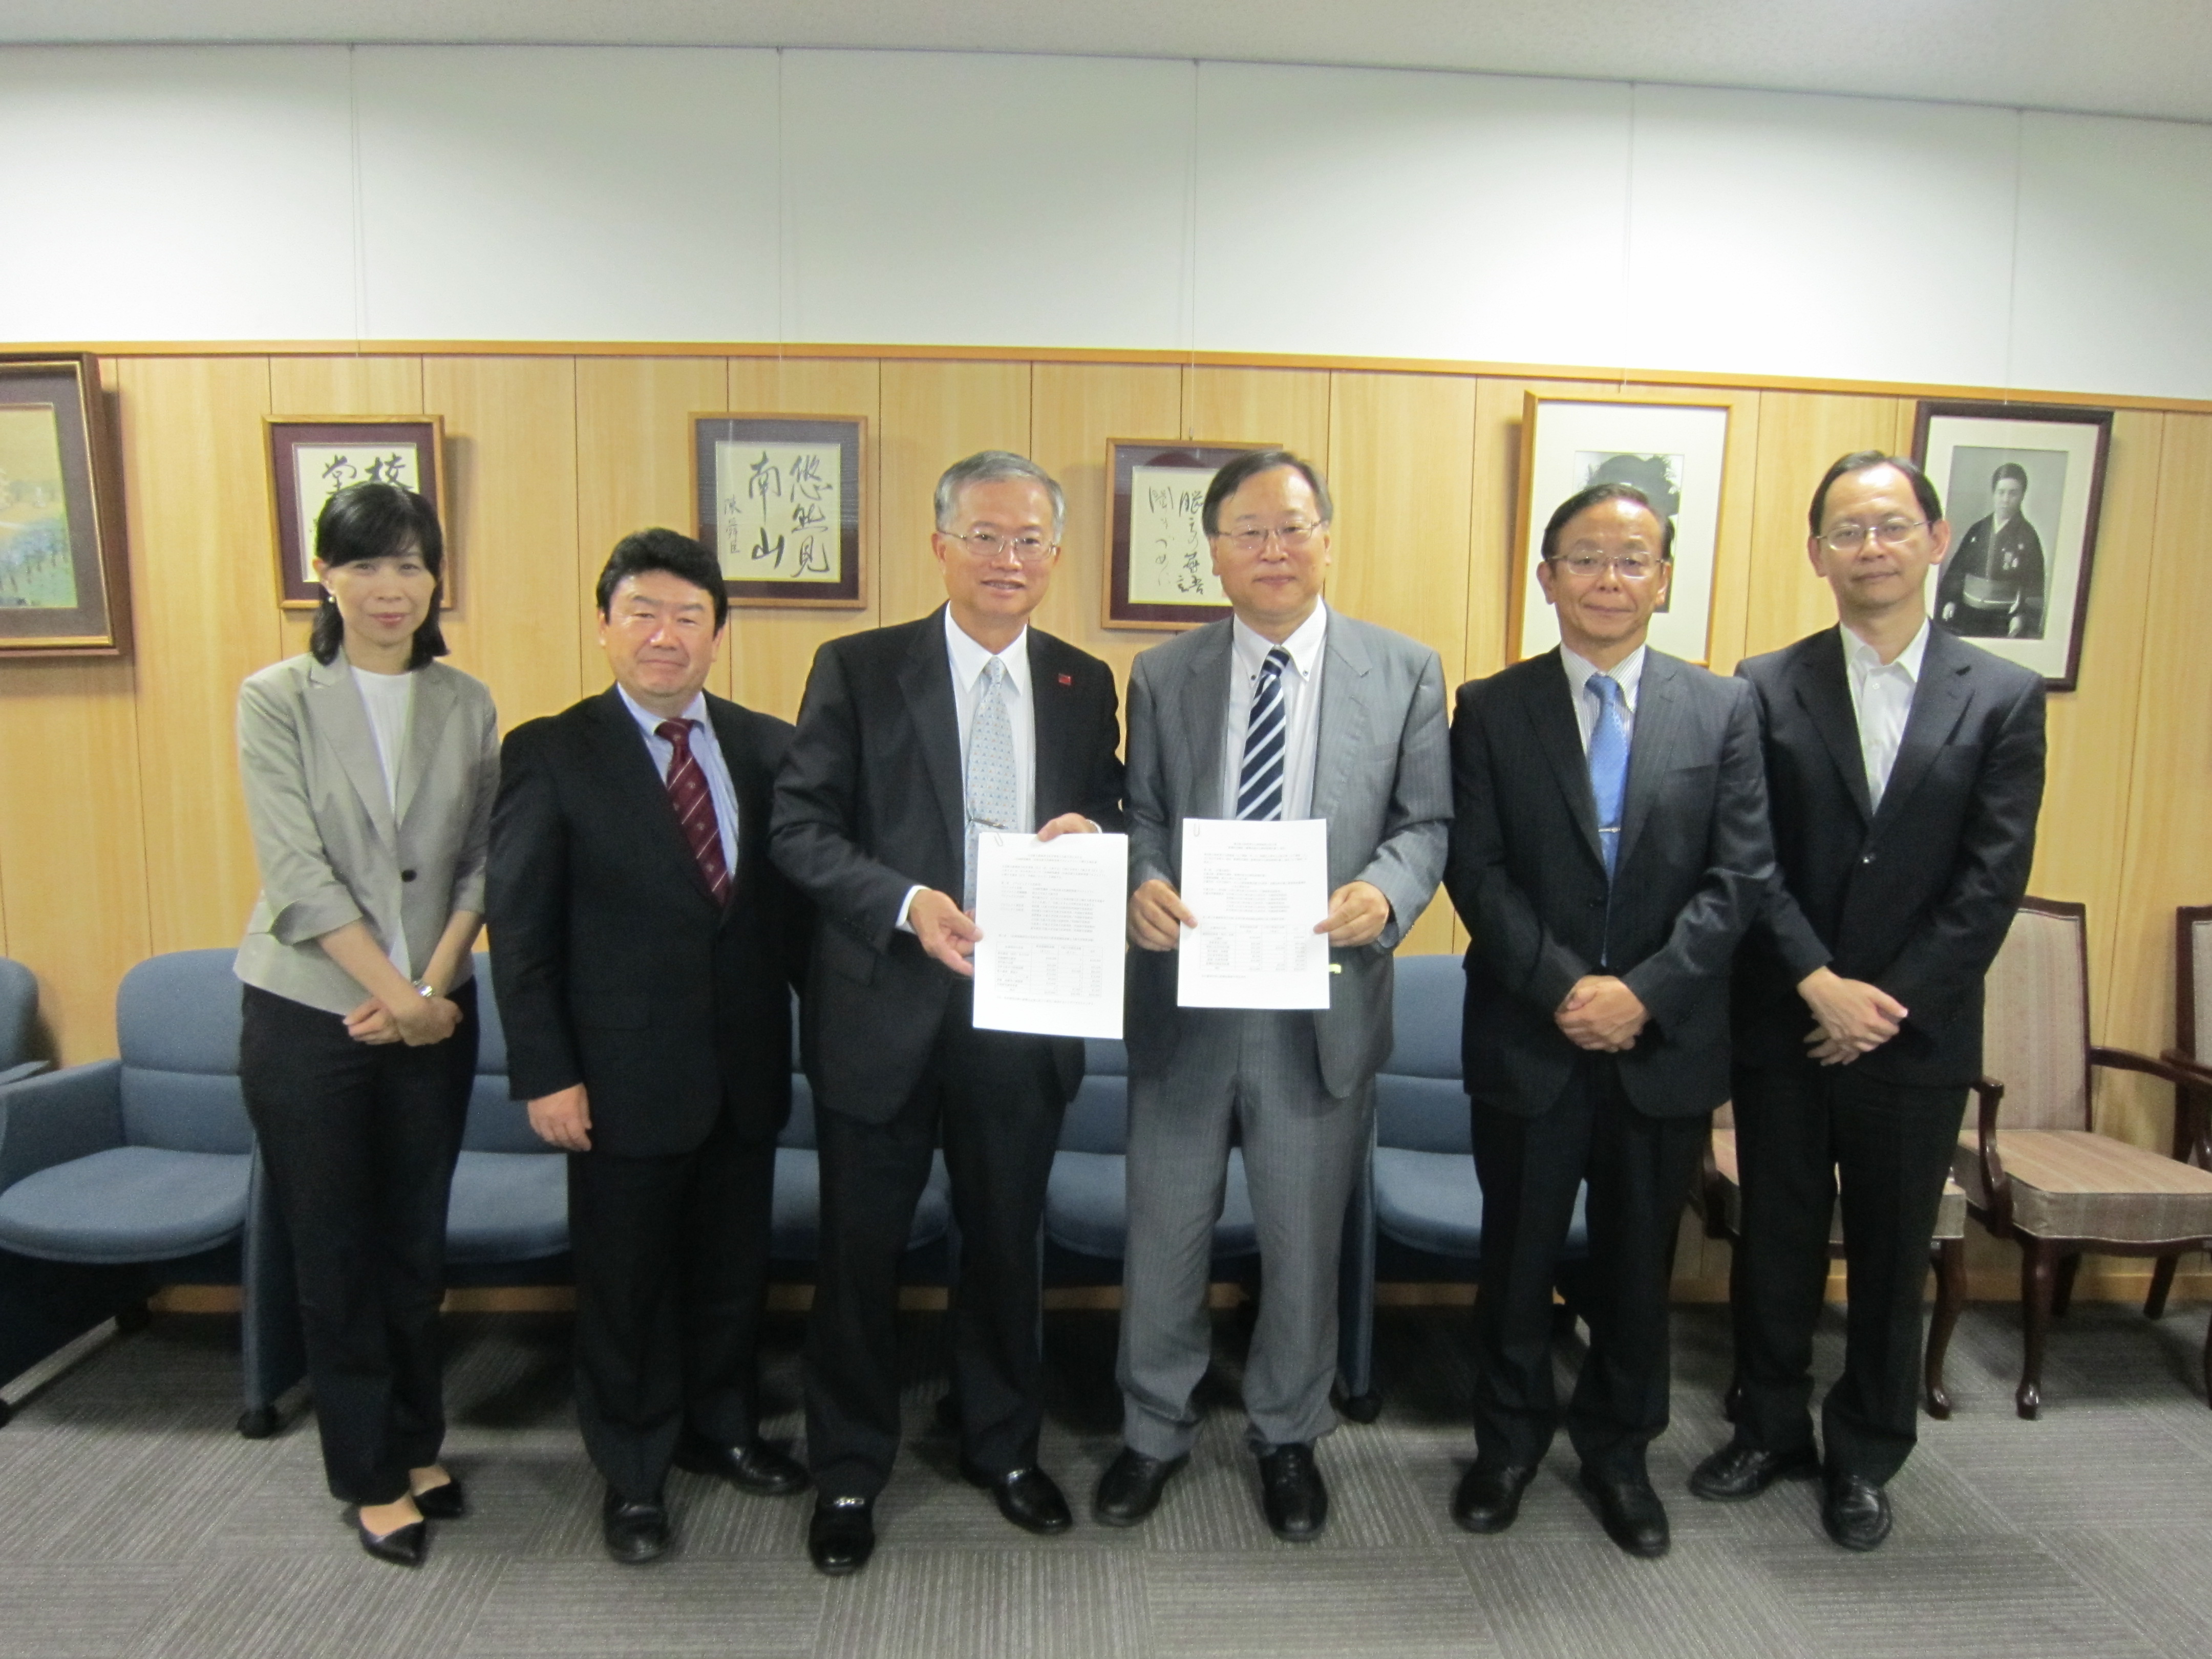 TECO in Osaka and Osaka University have signed a Taiwan Lectureship agreement